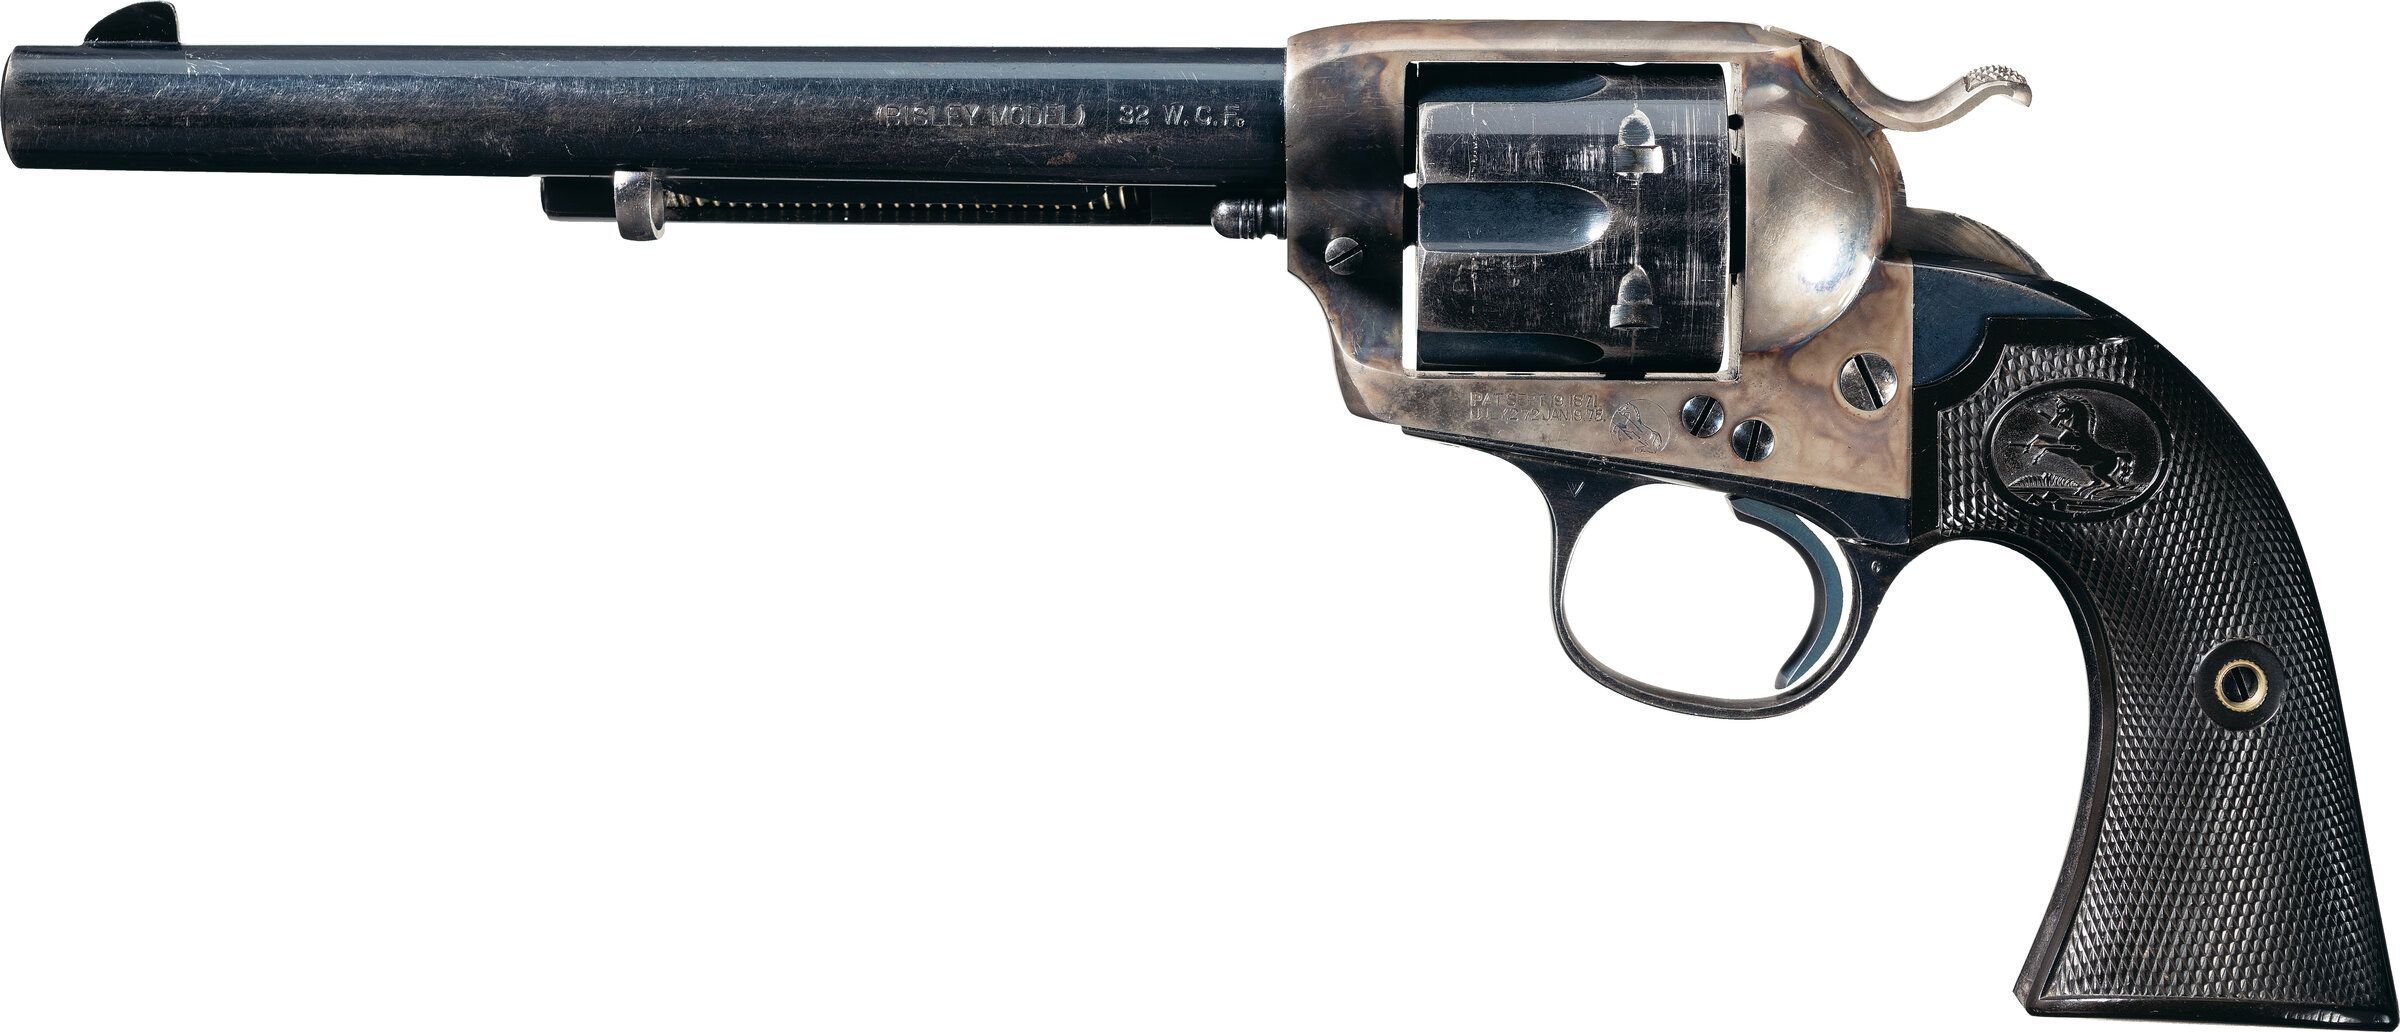 Colt Bisley Model Single Action Army Revolver | Rock Island Auction